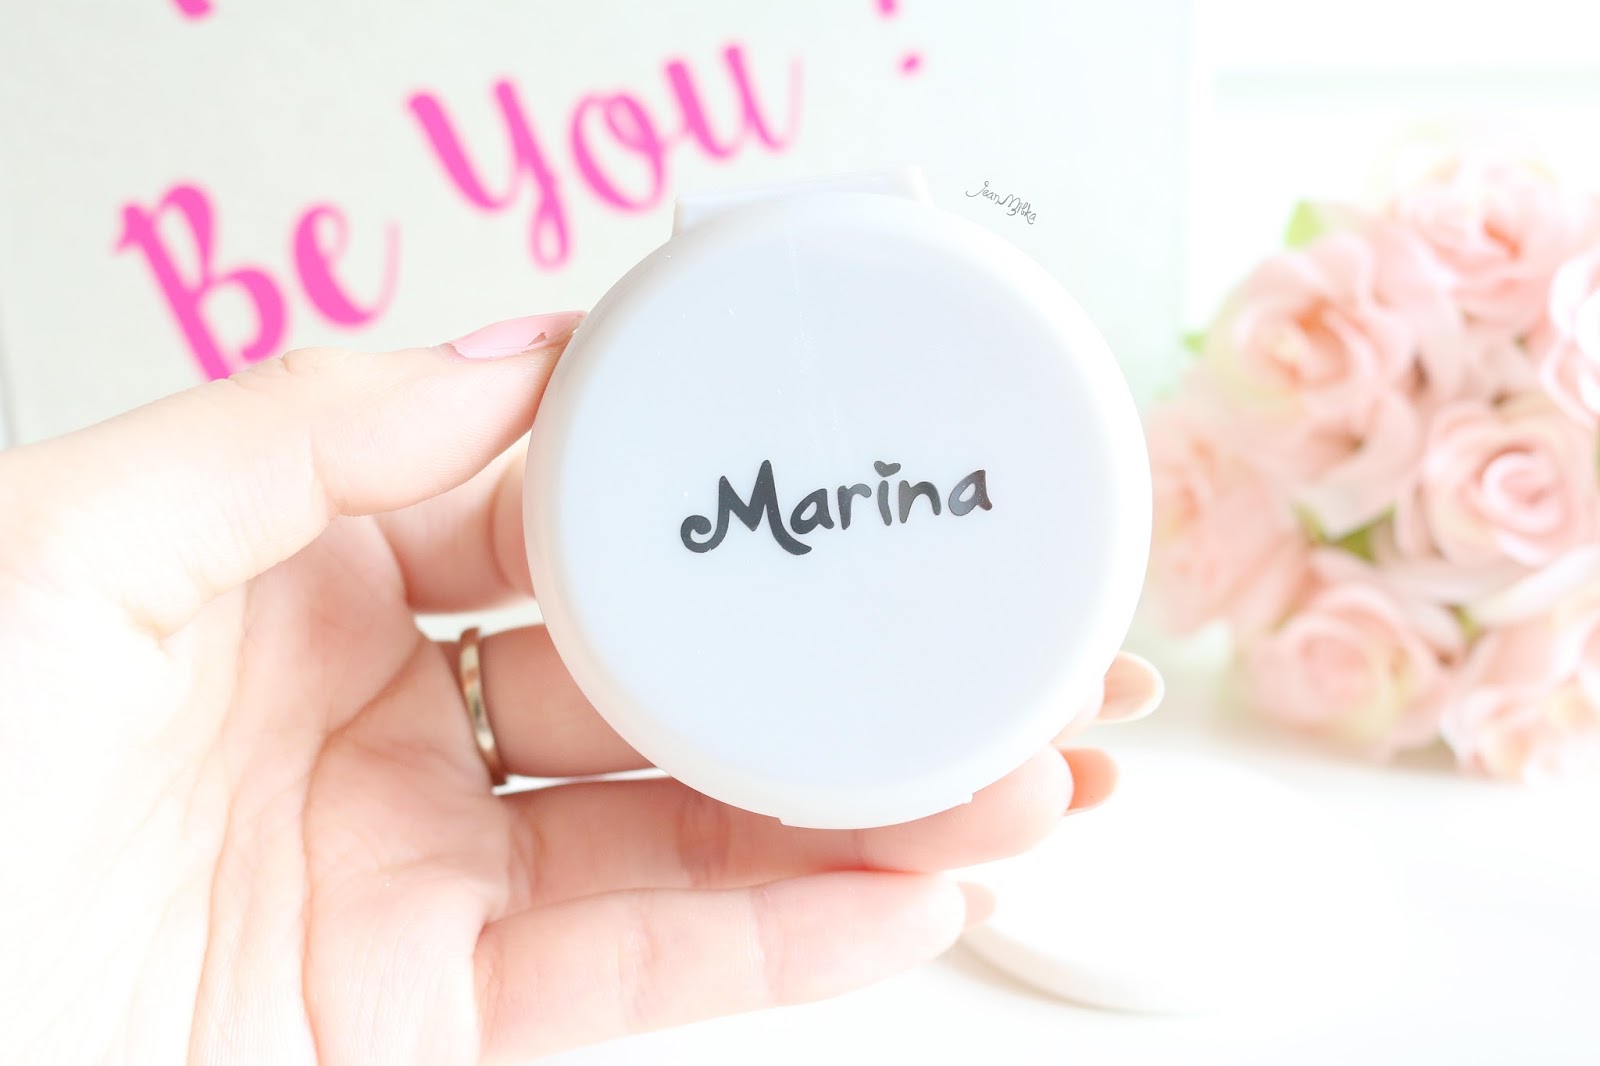 review, marina, marina smooth and glow, bb cream, two way cake, powdery foundation, compact powder, drugstore, makeup, makeup murah, smooth and glow uv, saatnya bersinar, powdery foundation, marina powdery foundation